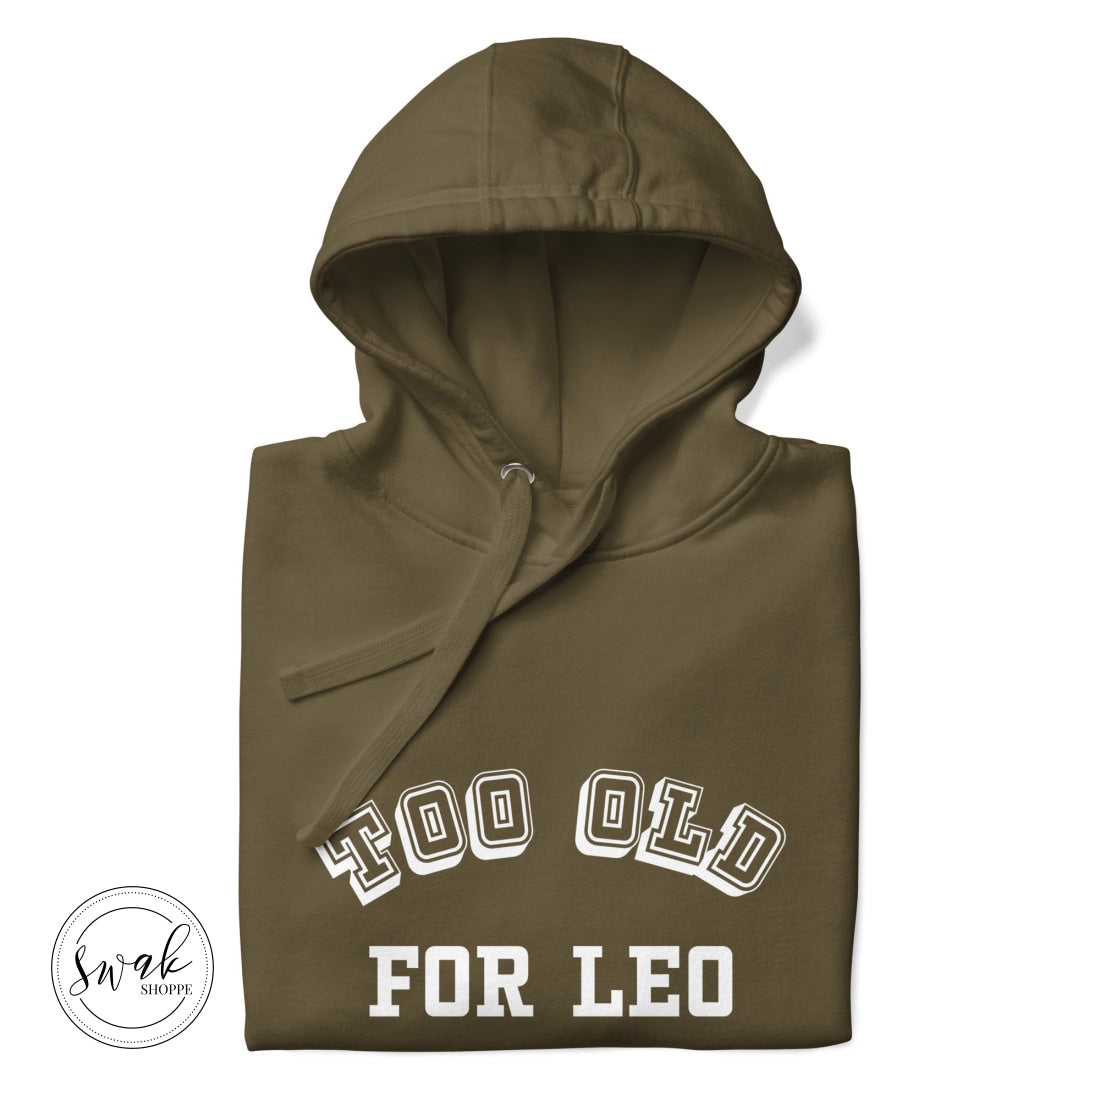 Too Old For Leo Collegiate White Logo Unisex Hoodie Military Green / S